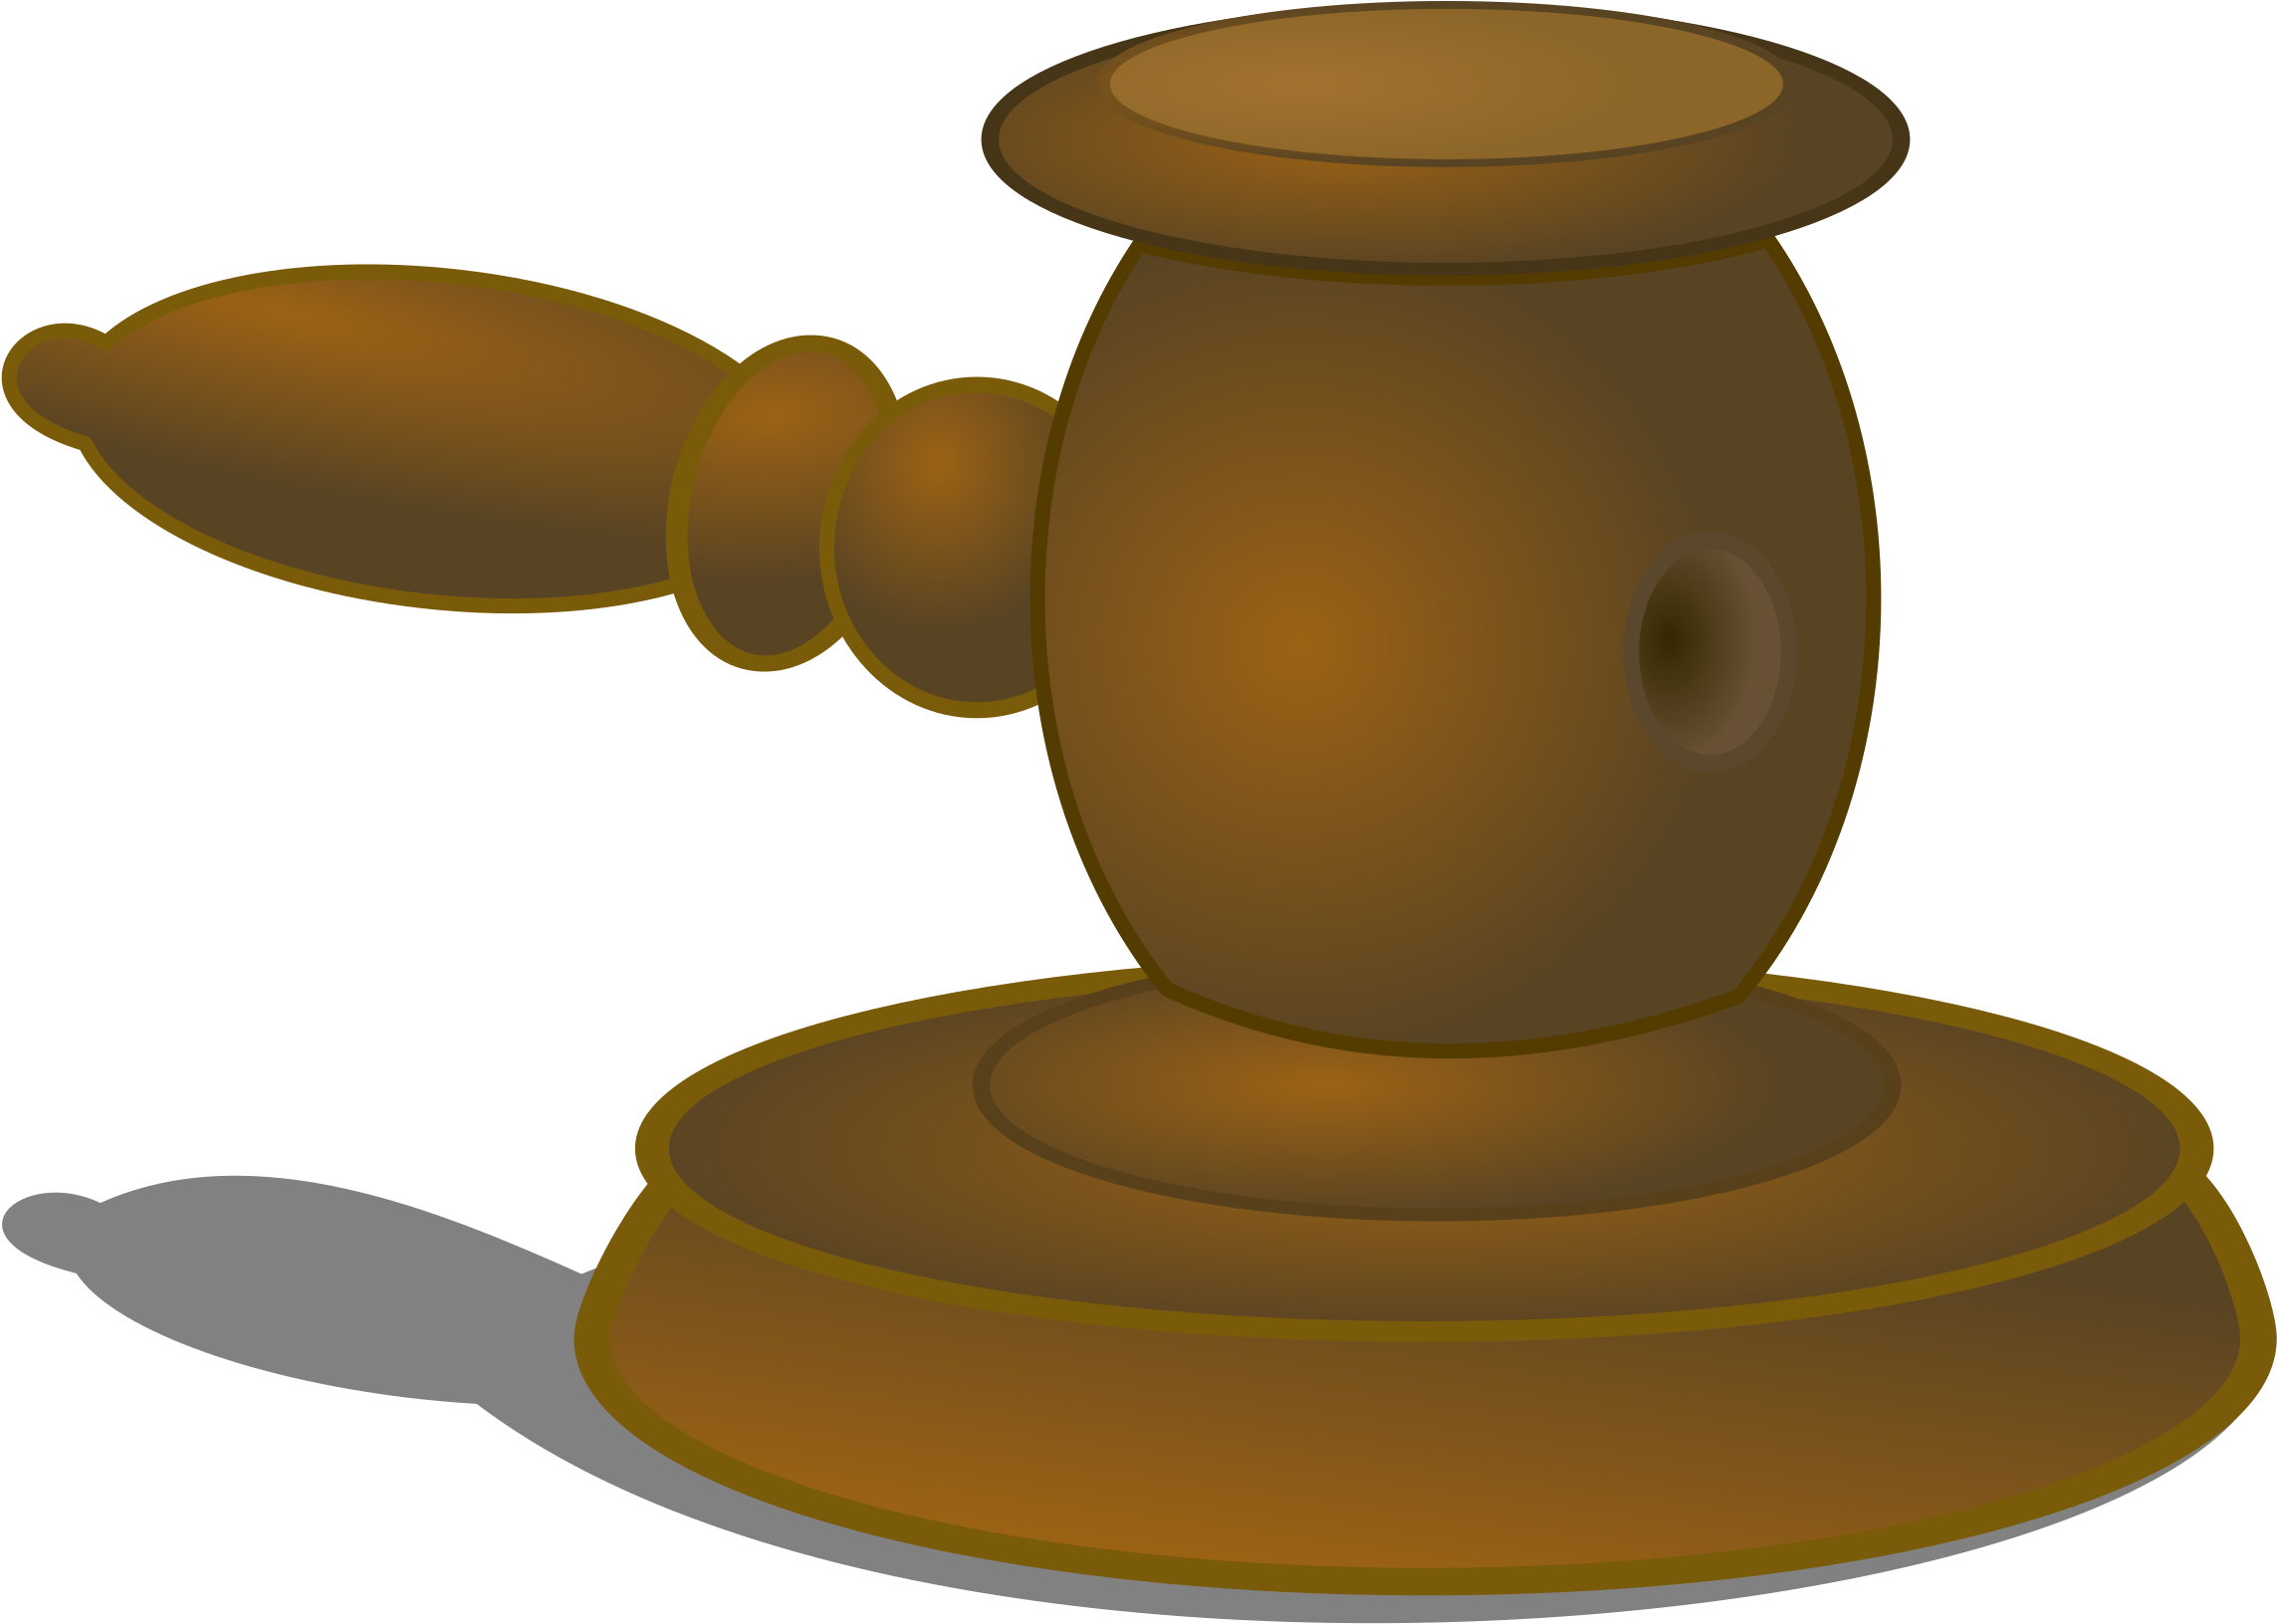 A Brown Wooden Gavel With A Handle